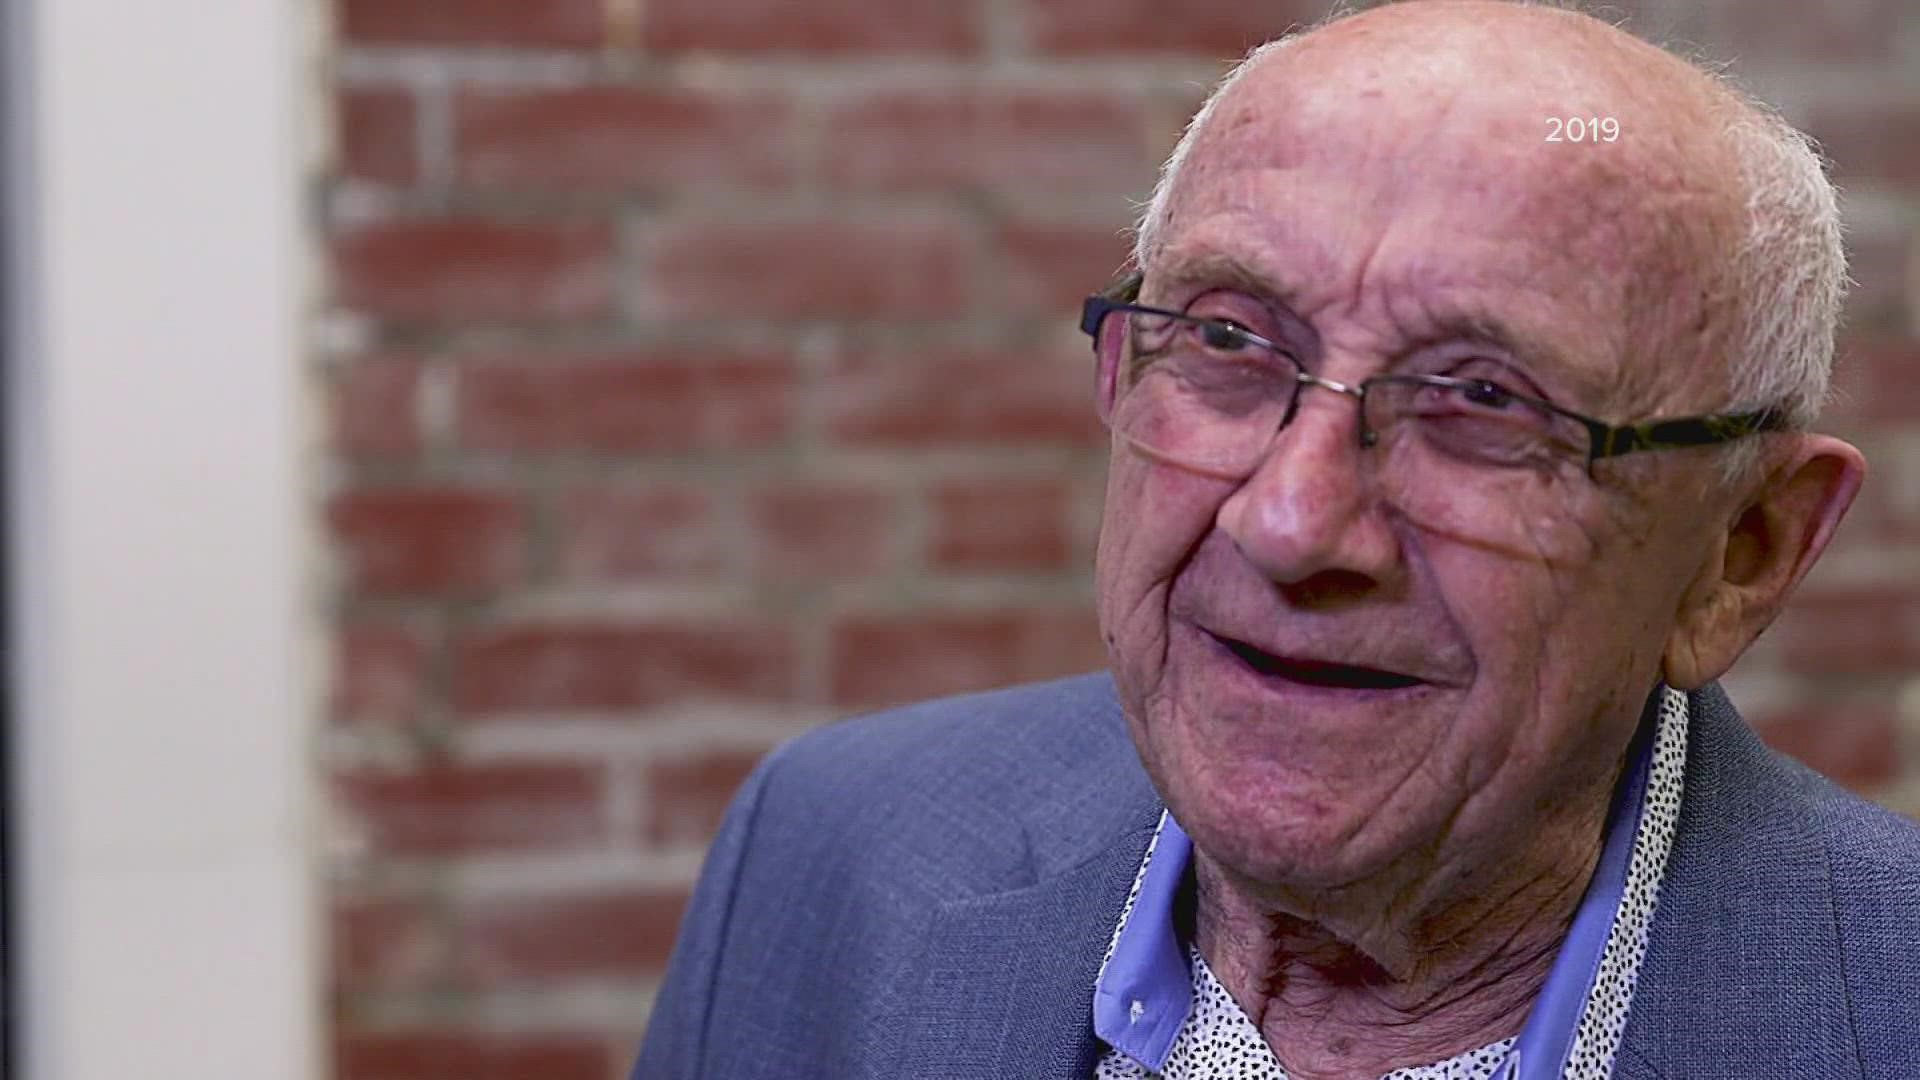 The Museum announced the death of 94-year-old Max Glauben on Holocaust Remembrance Day.